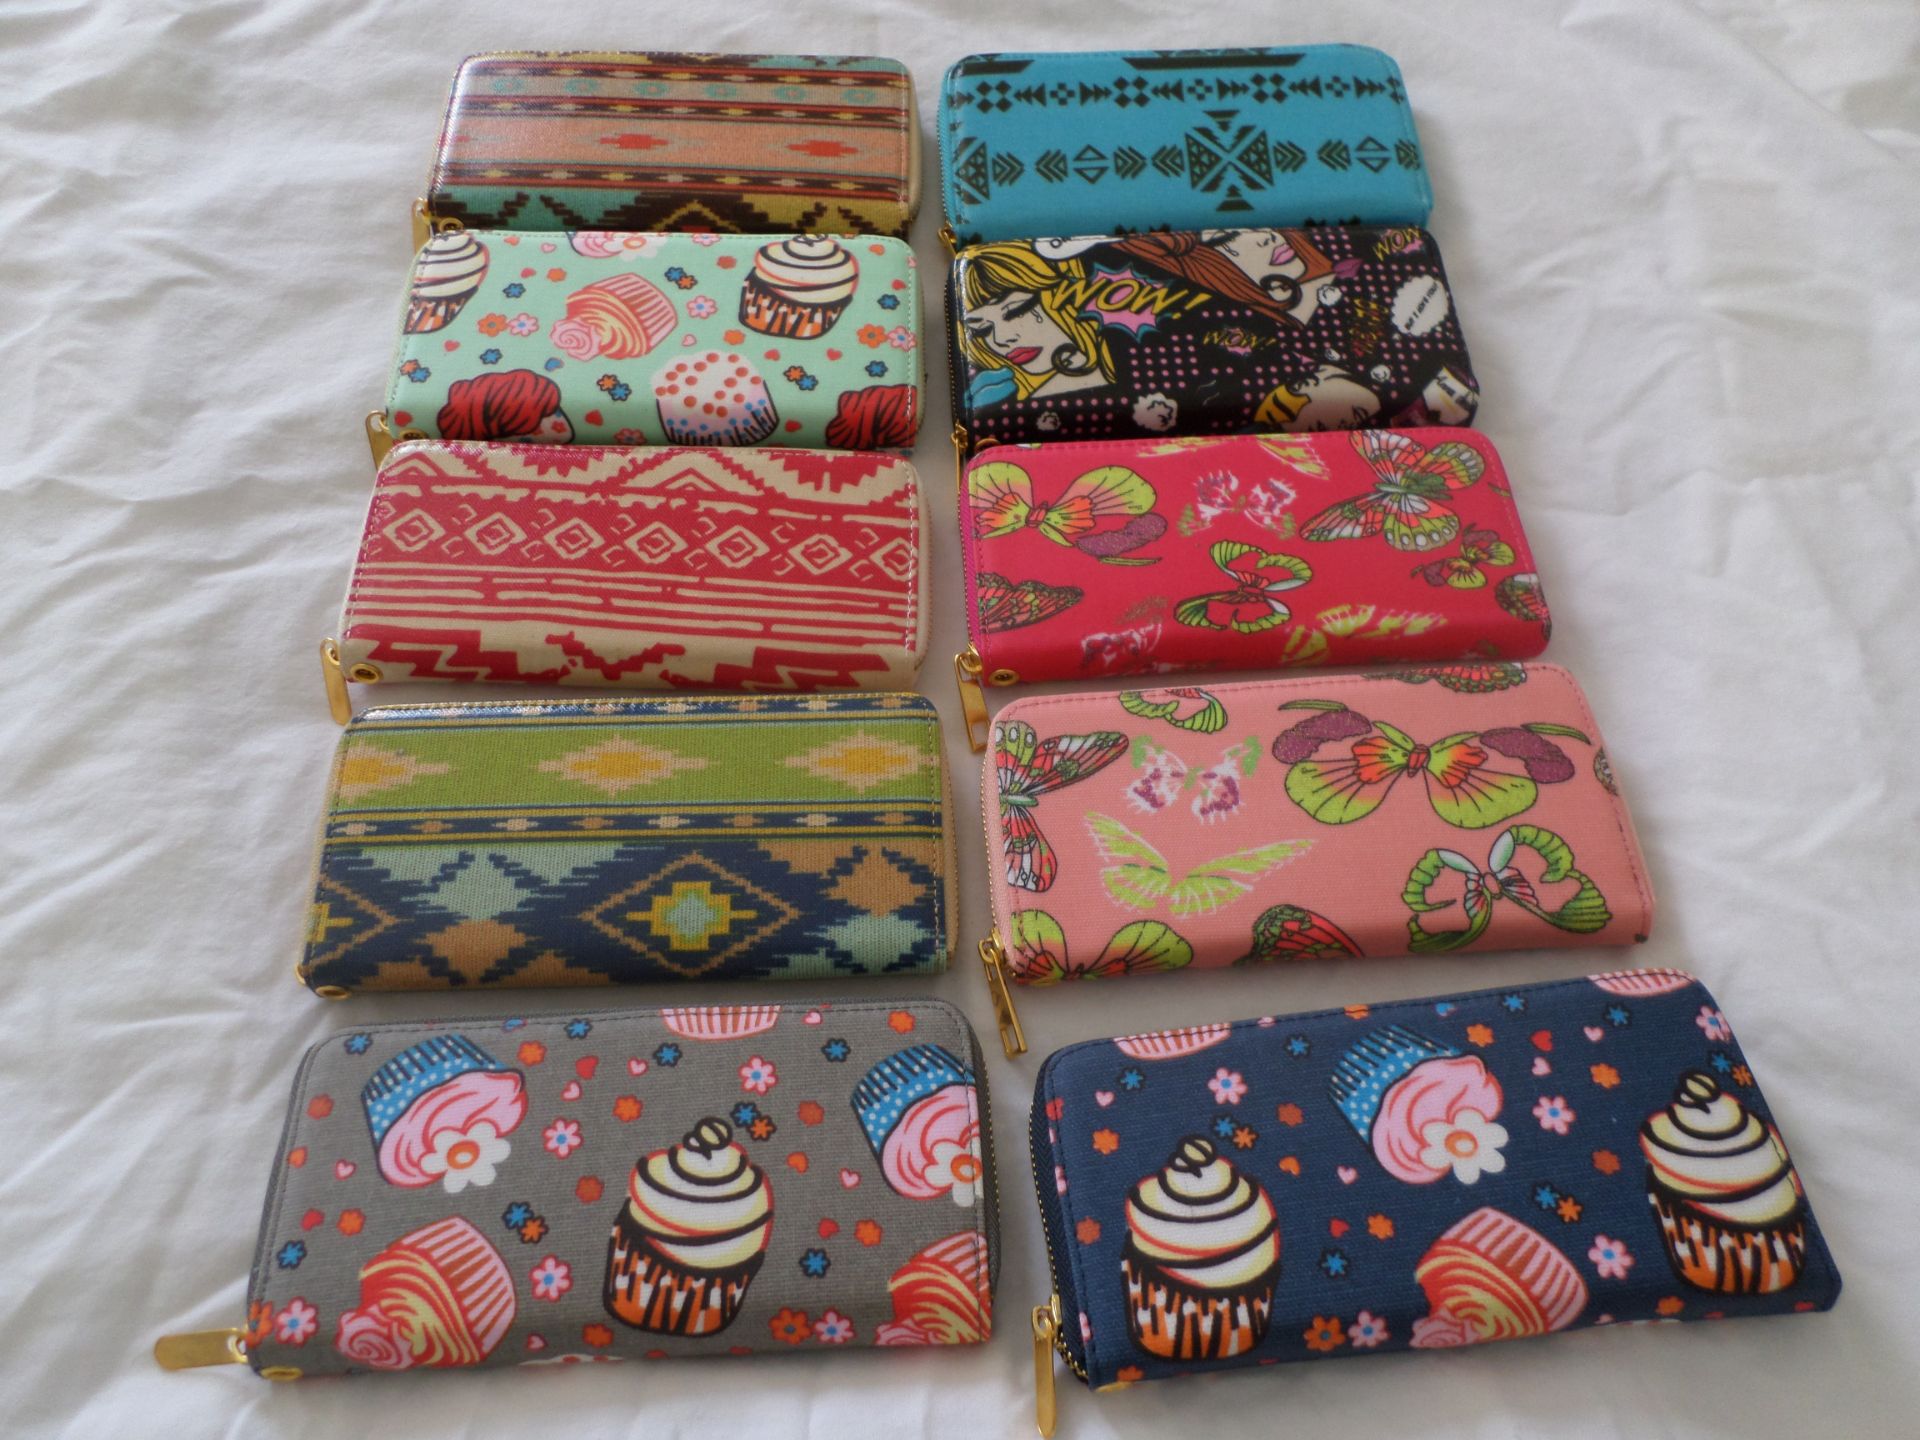 20 x Ladies Clutch/Purses RRP £14 Each. Brand New - Image 4 of 5